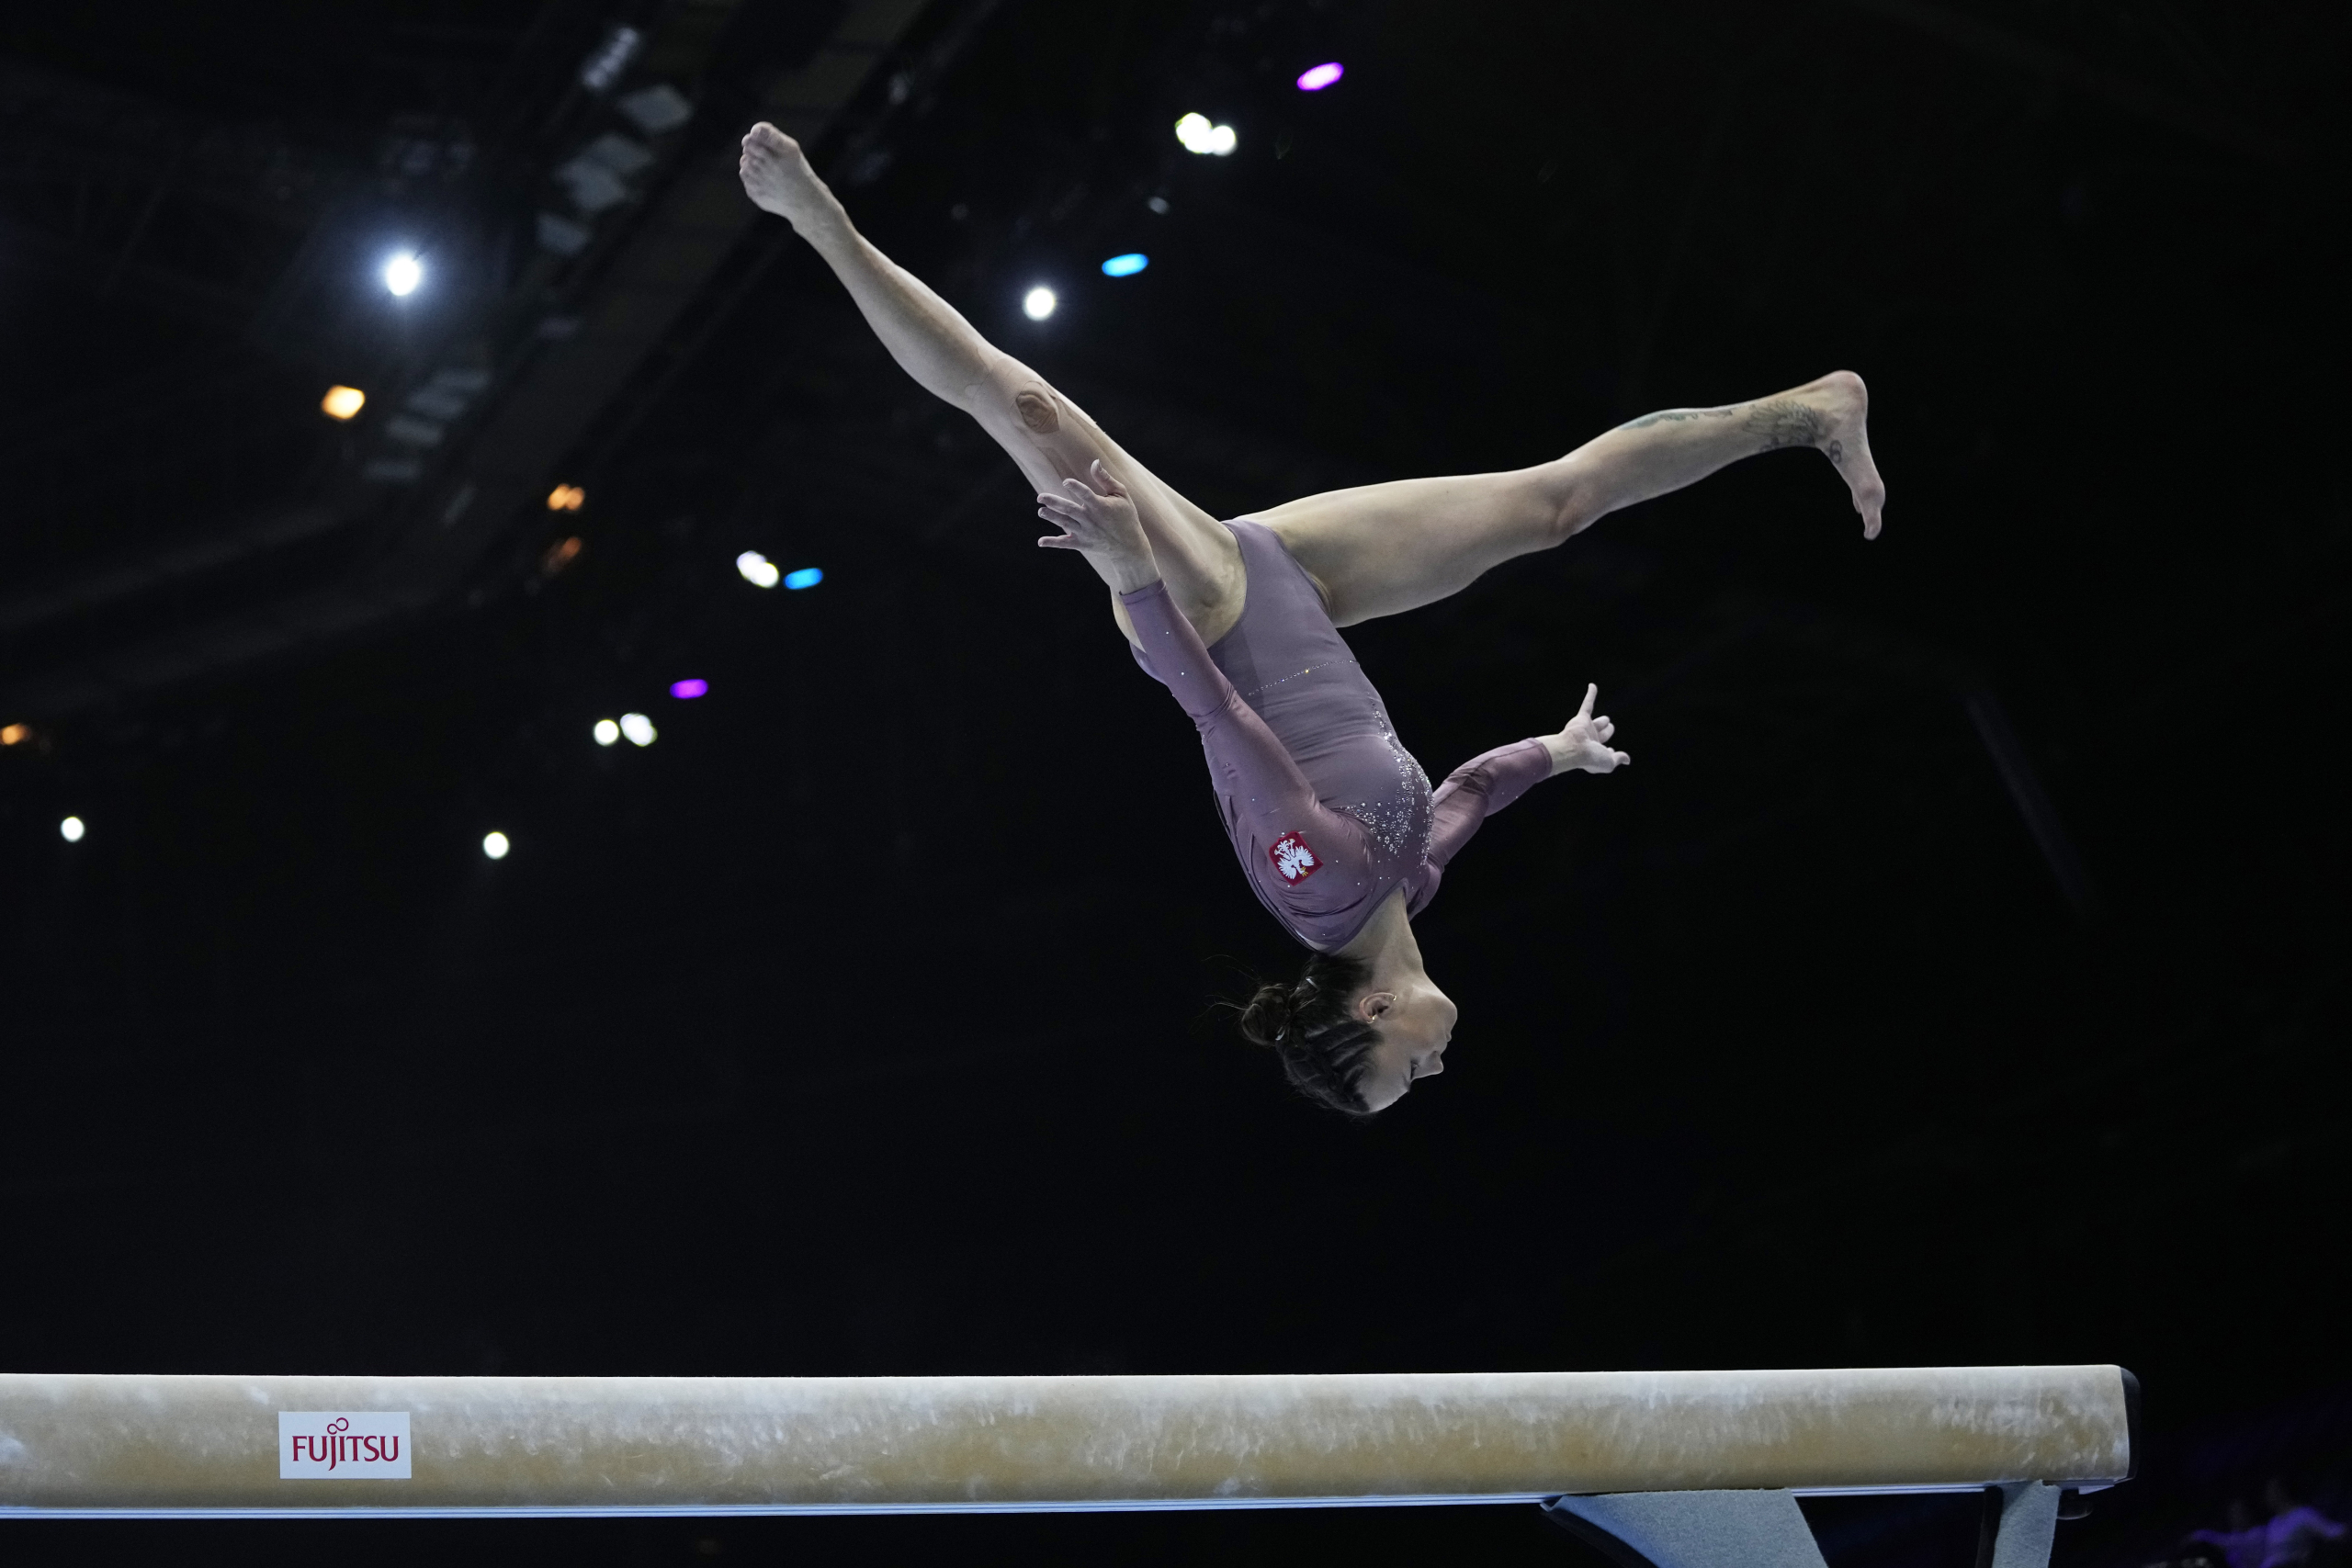 Poland's Marta Pihan-Kulesza practices on the balance beam during podium training at the Artistic Gymnastics World Championships in Antwerp, Belgium, Thursday, Sept. 28, 2023. The event will take place until Sunday, Oct. 8. (AP Photo/Virginia Mayo)